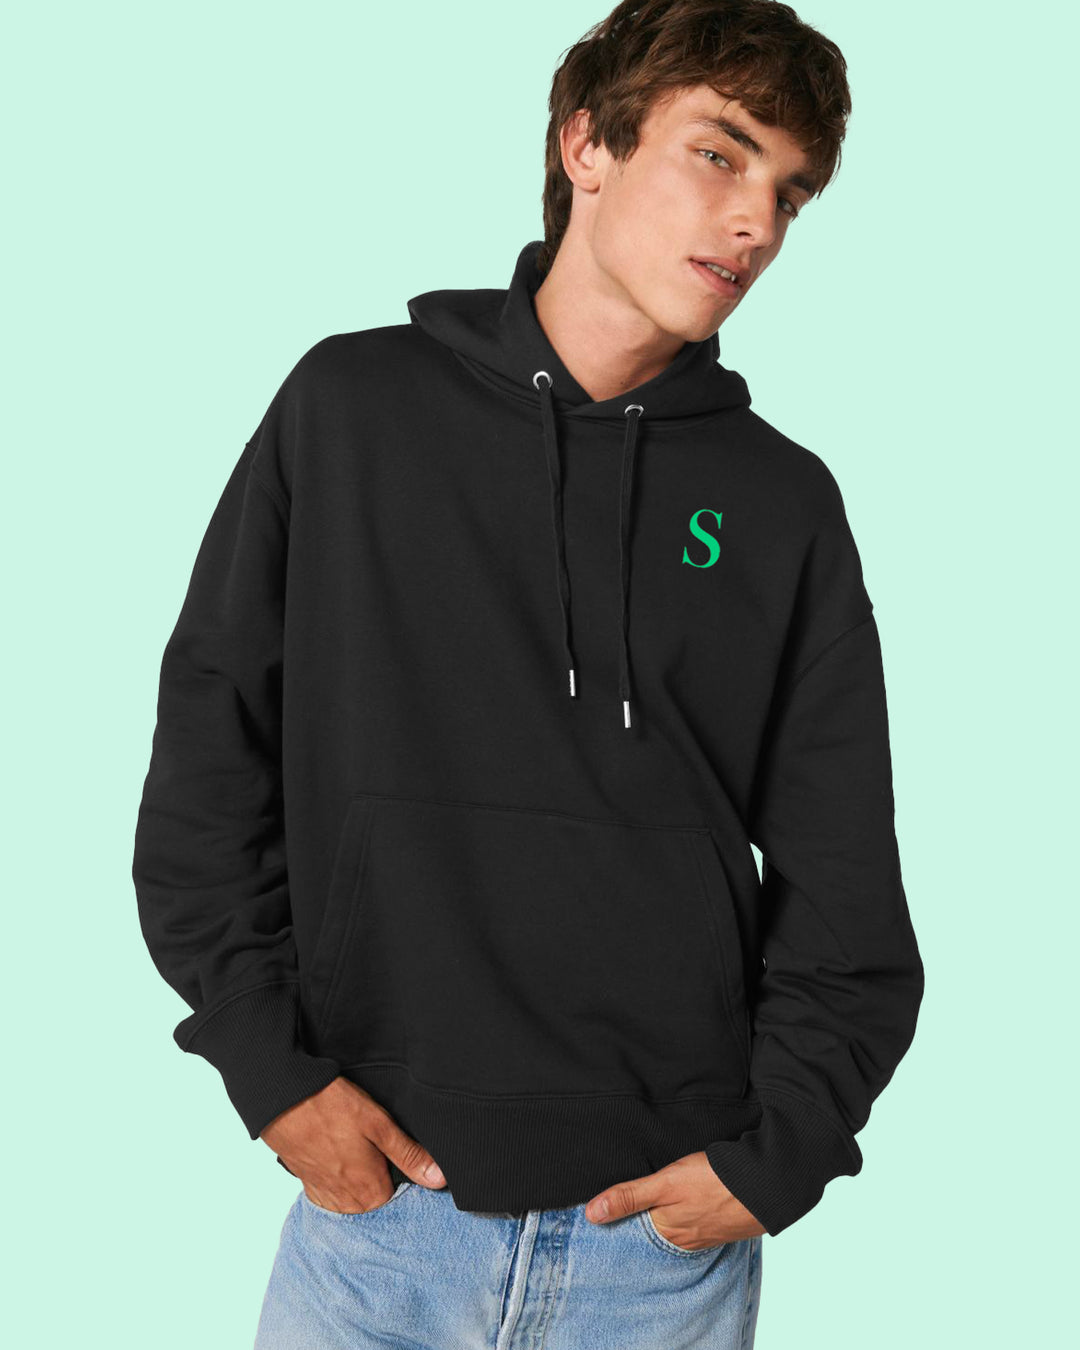 JOINTS Unisex Hooded Sweat/Hoodie by SAINFORT